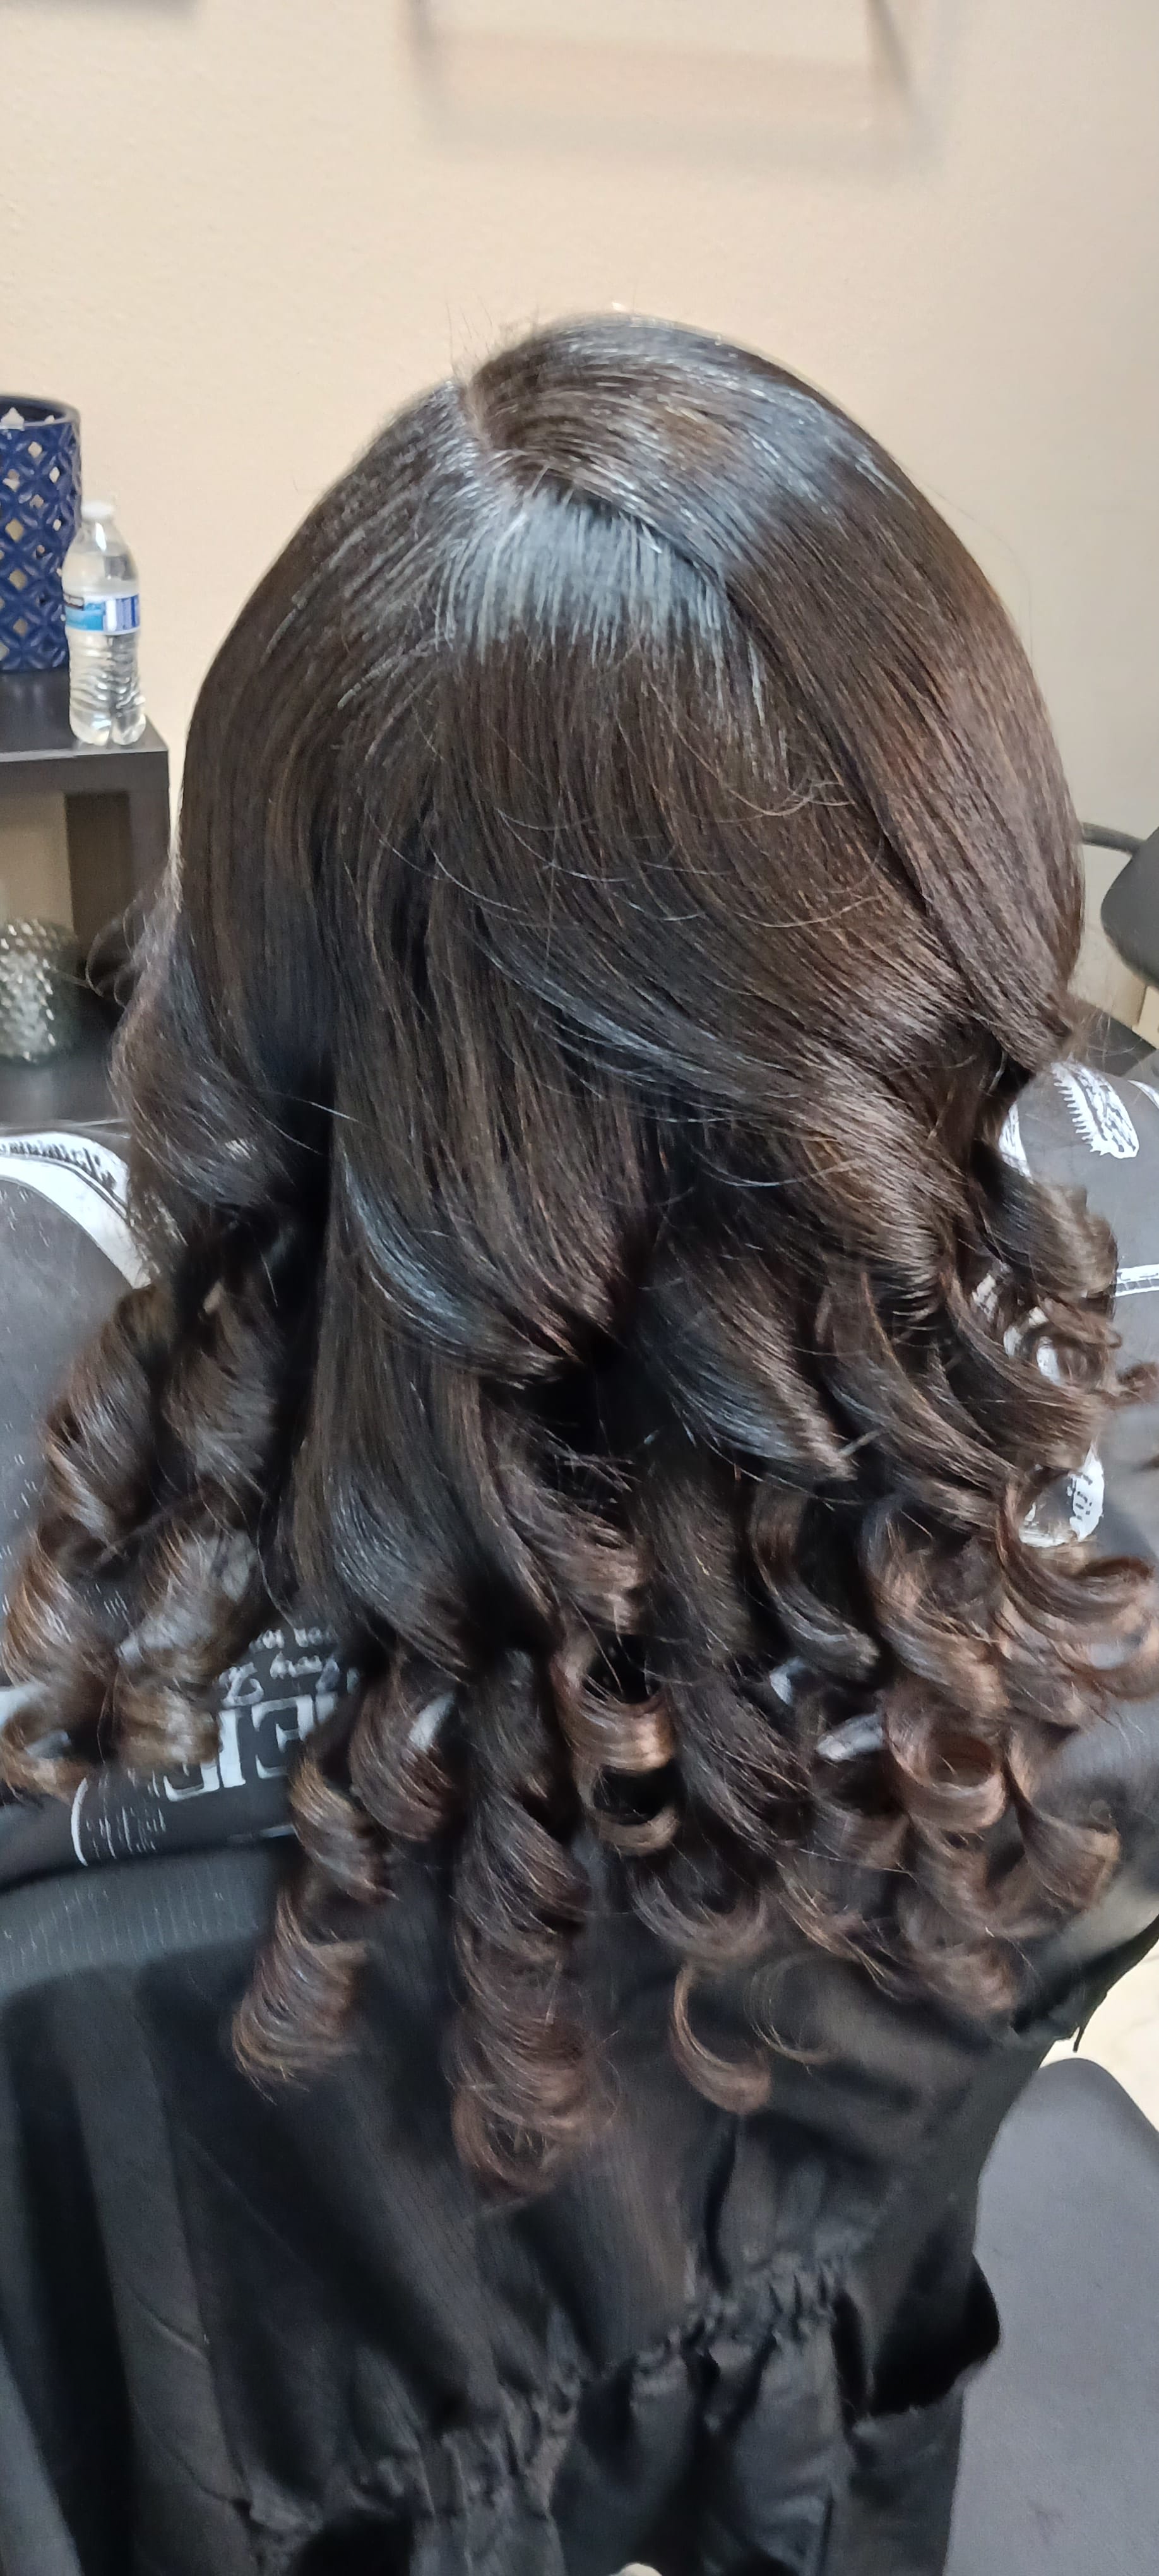 Shampoo and Style - Hair Services - Haircare by Kash | Hair Salon in Houston